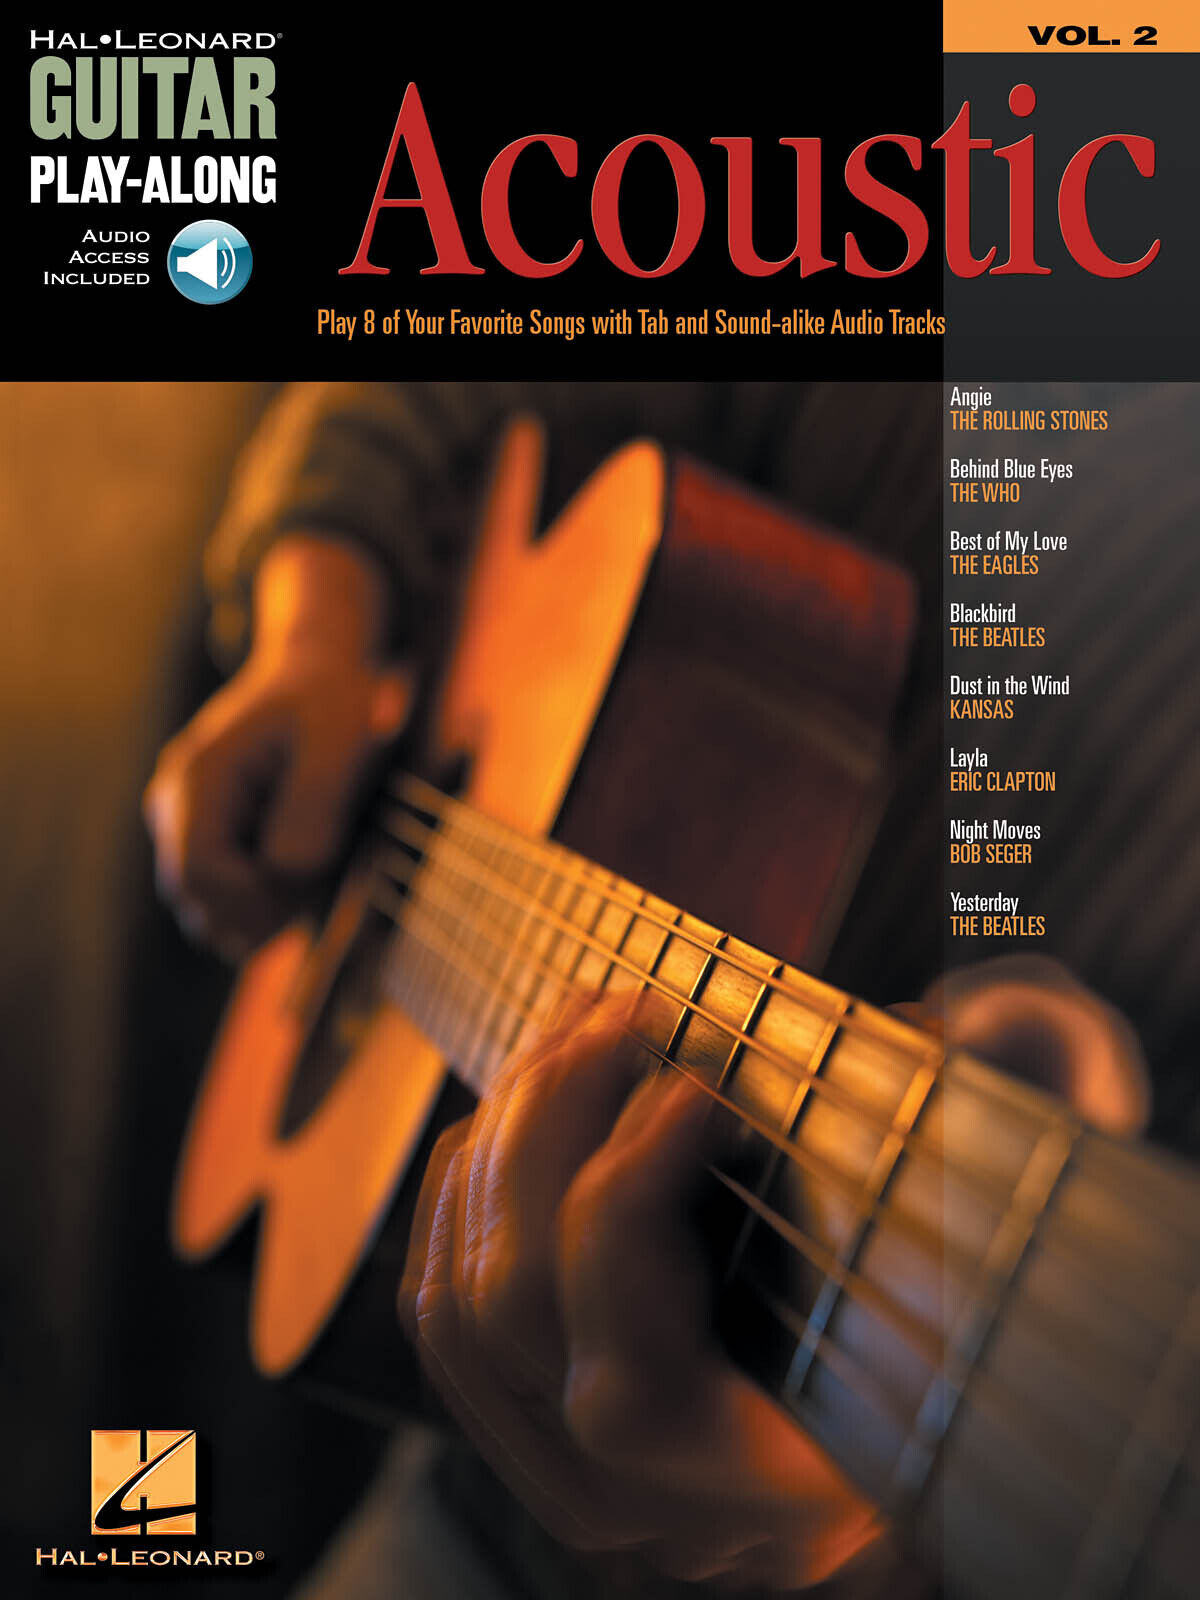 Acoustic Guitar Play-Along Vol 2 Notes & Tab Sheet Music Songs Book Online Audio